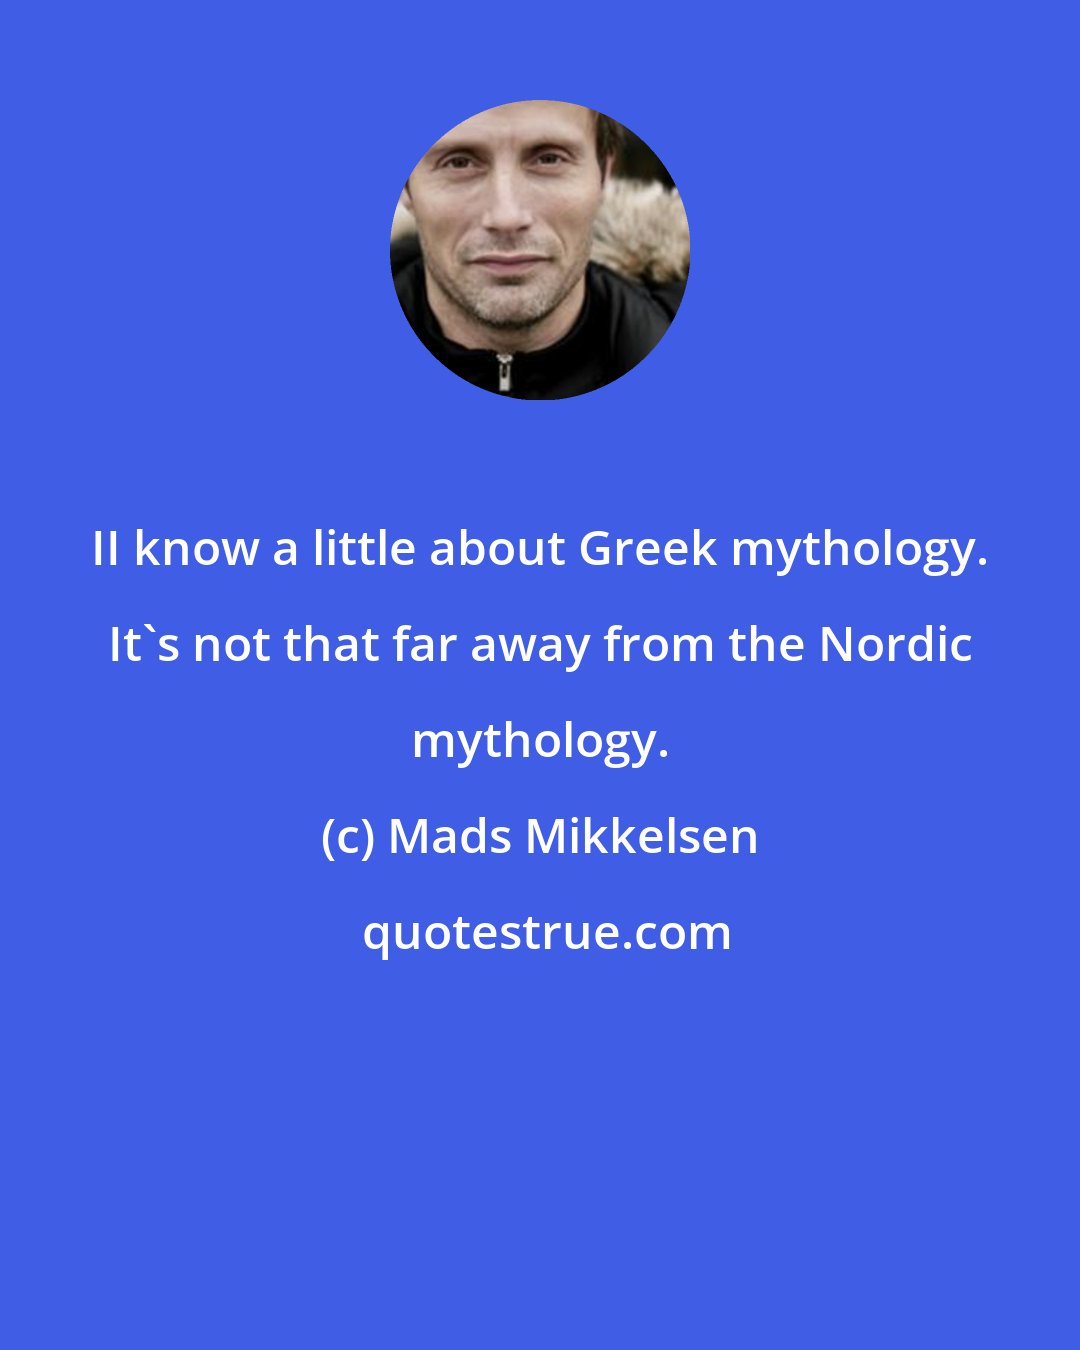 Mads Mikkelsen: II know a little about Greek mythology. It's not that far away from the Nordic mythology.